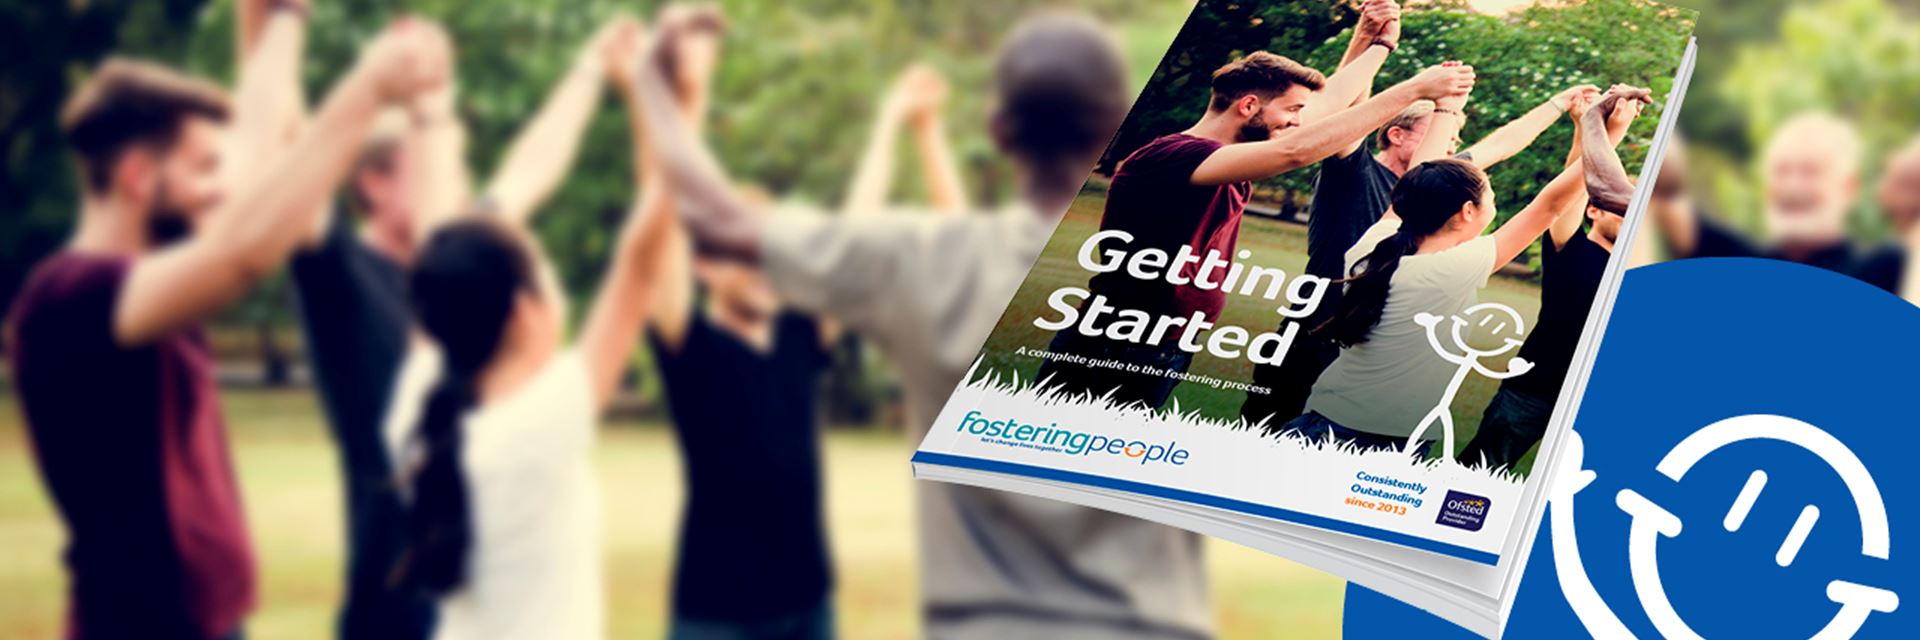 The Fostering Process for Beginners Download